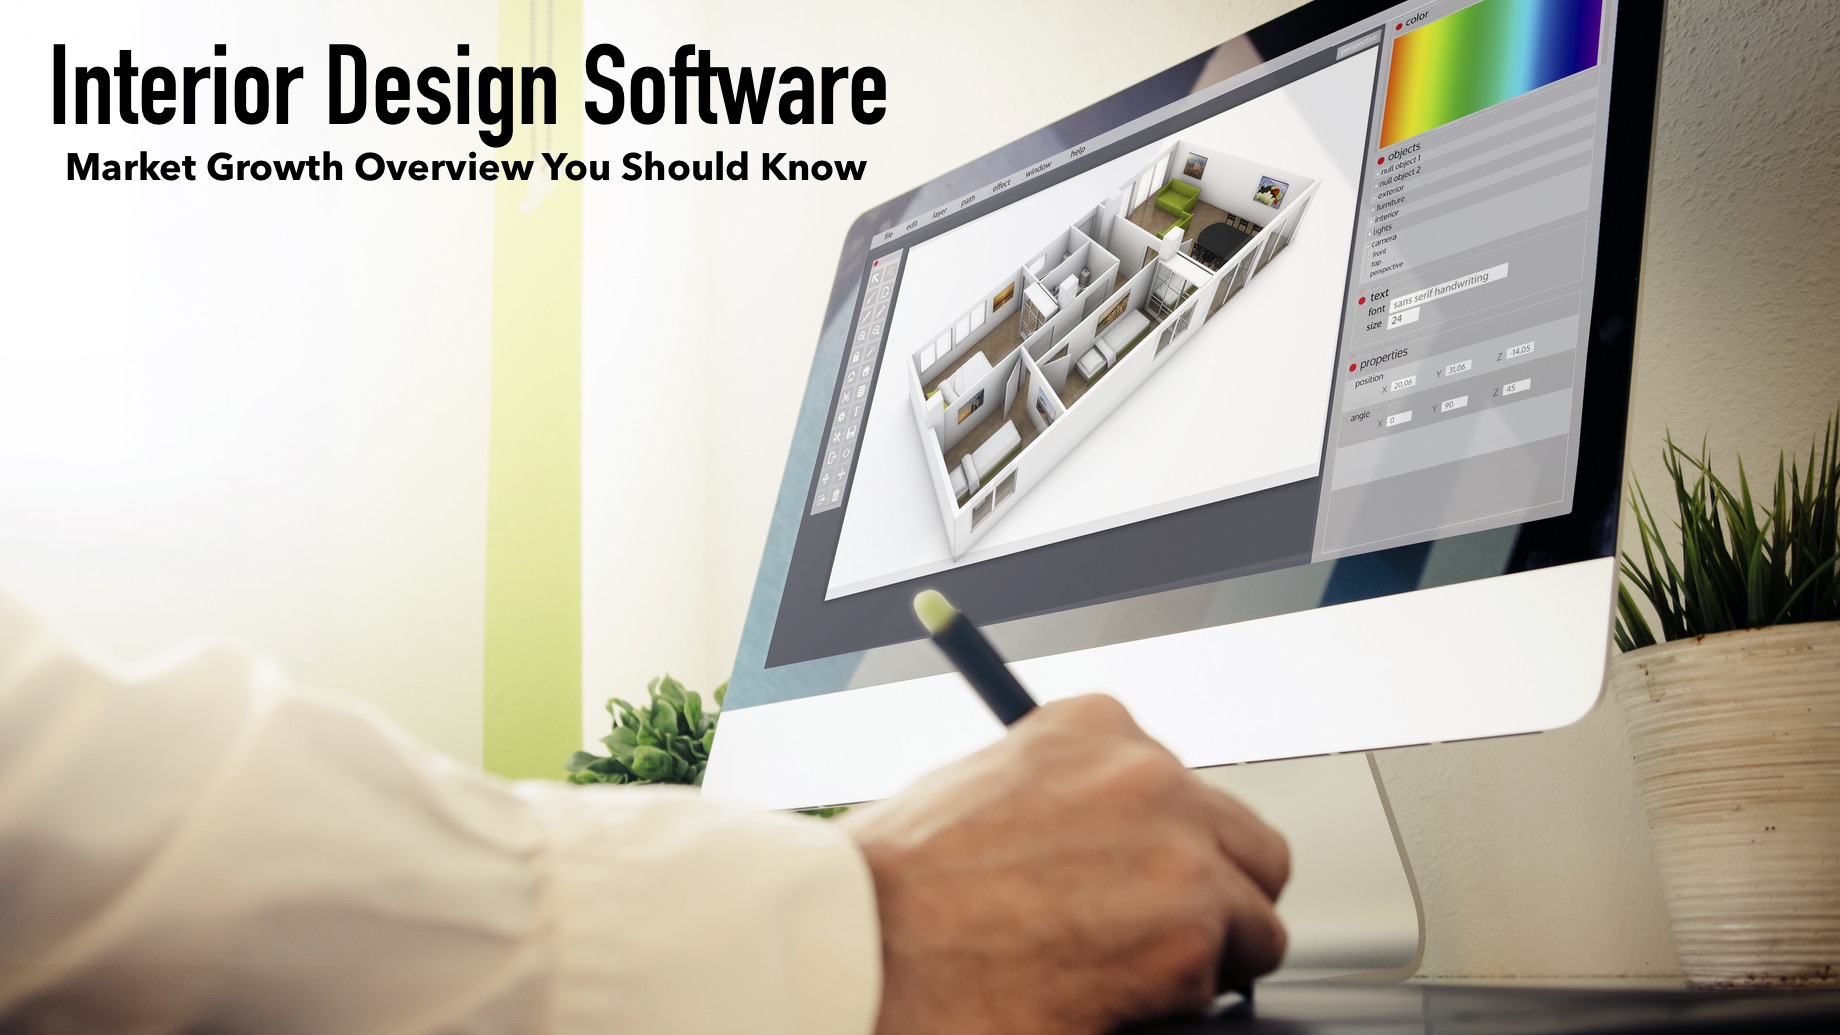 Interior Design Software - Market Growth Overview You Should Know